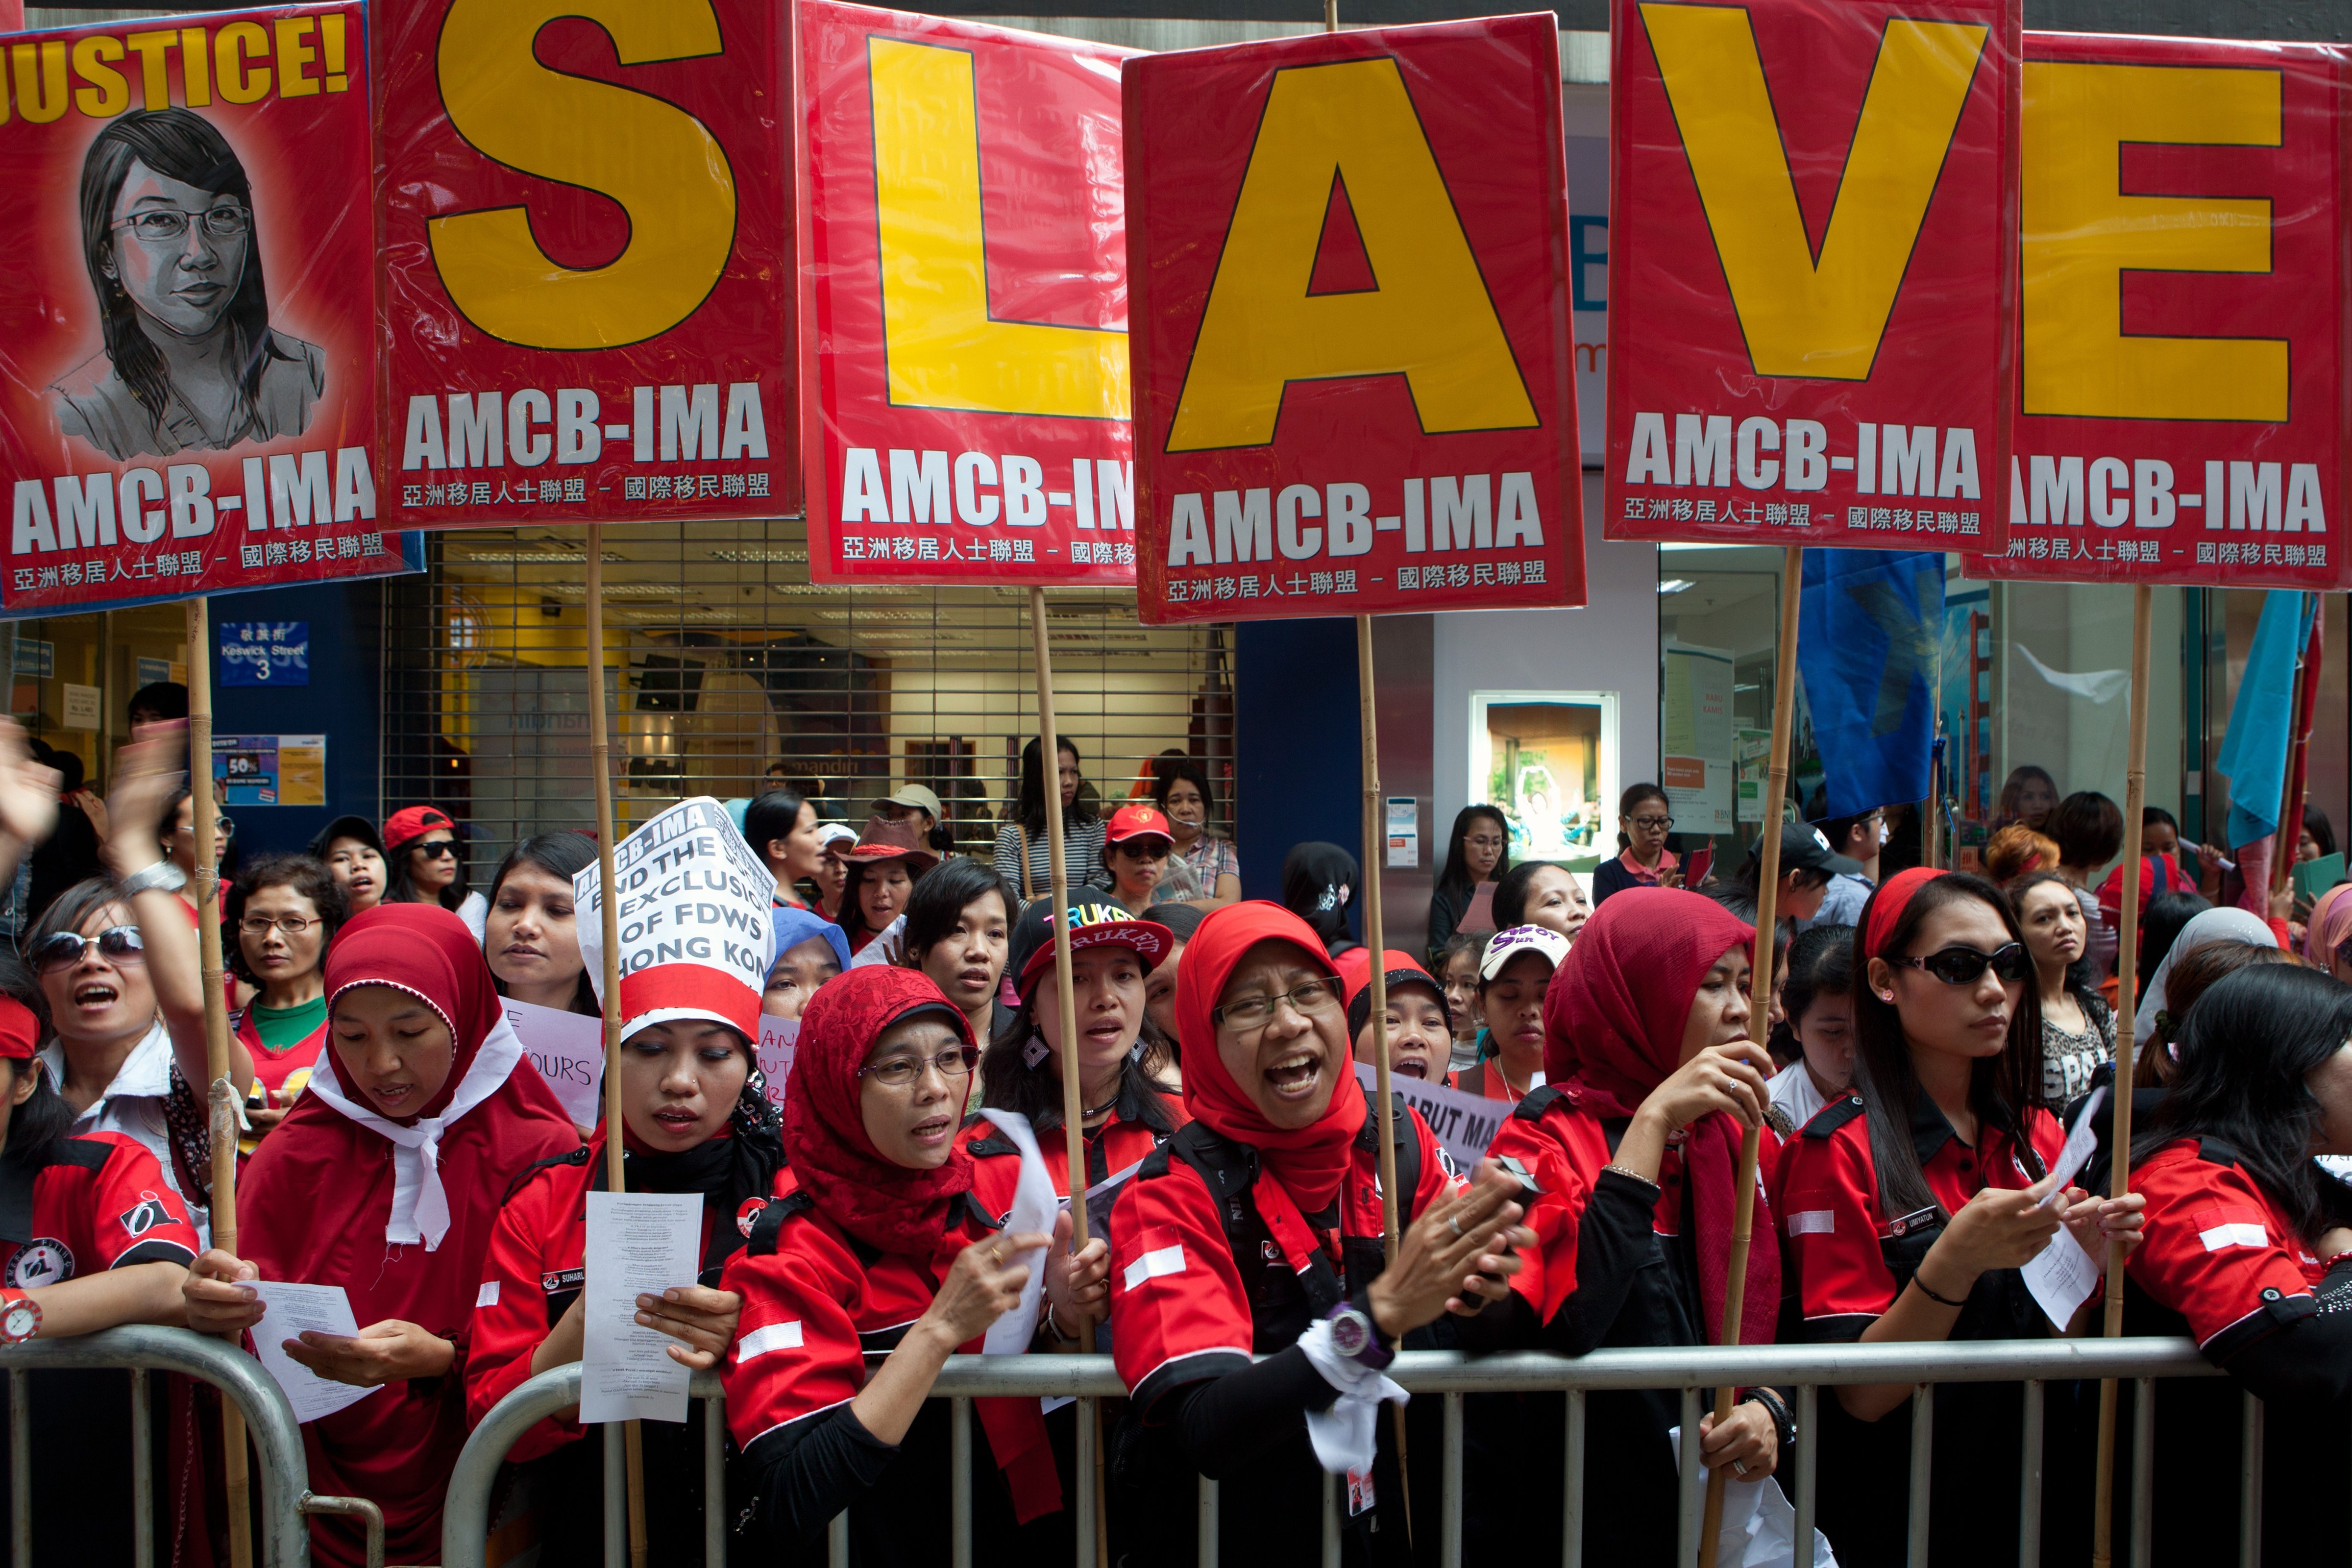 Migrant workers from Indonesia carry placards which collectively read "Slave" during a Labour Day rally in Hong Kong on May 1, 2014. (Anthony Wallace—AFP/Getty Images)